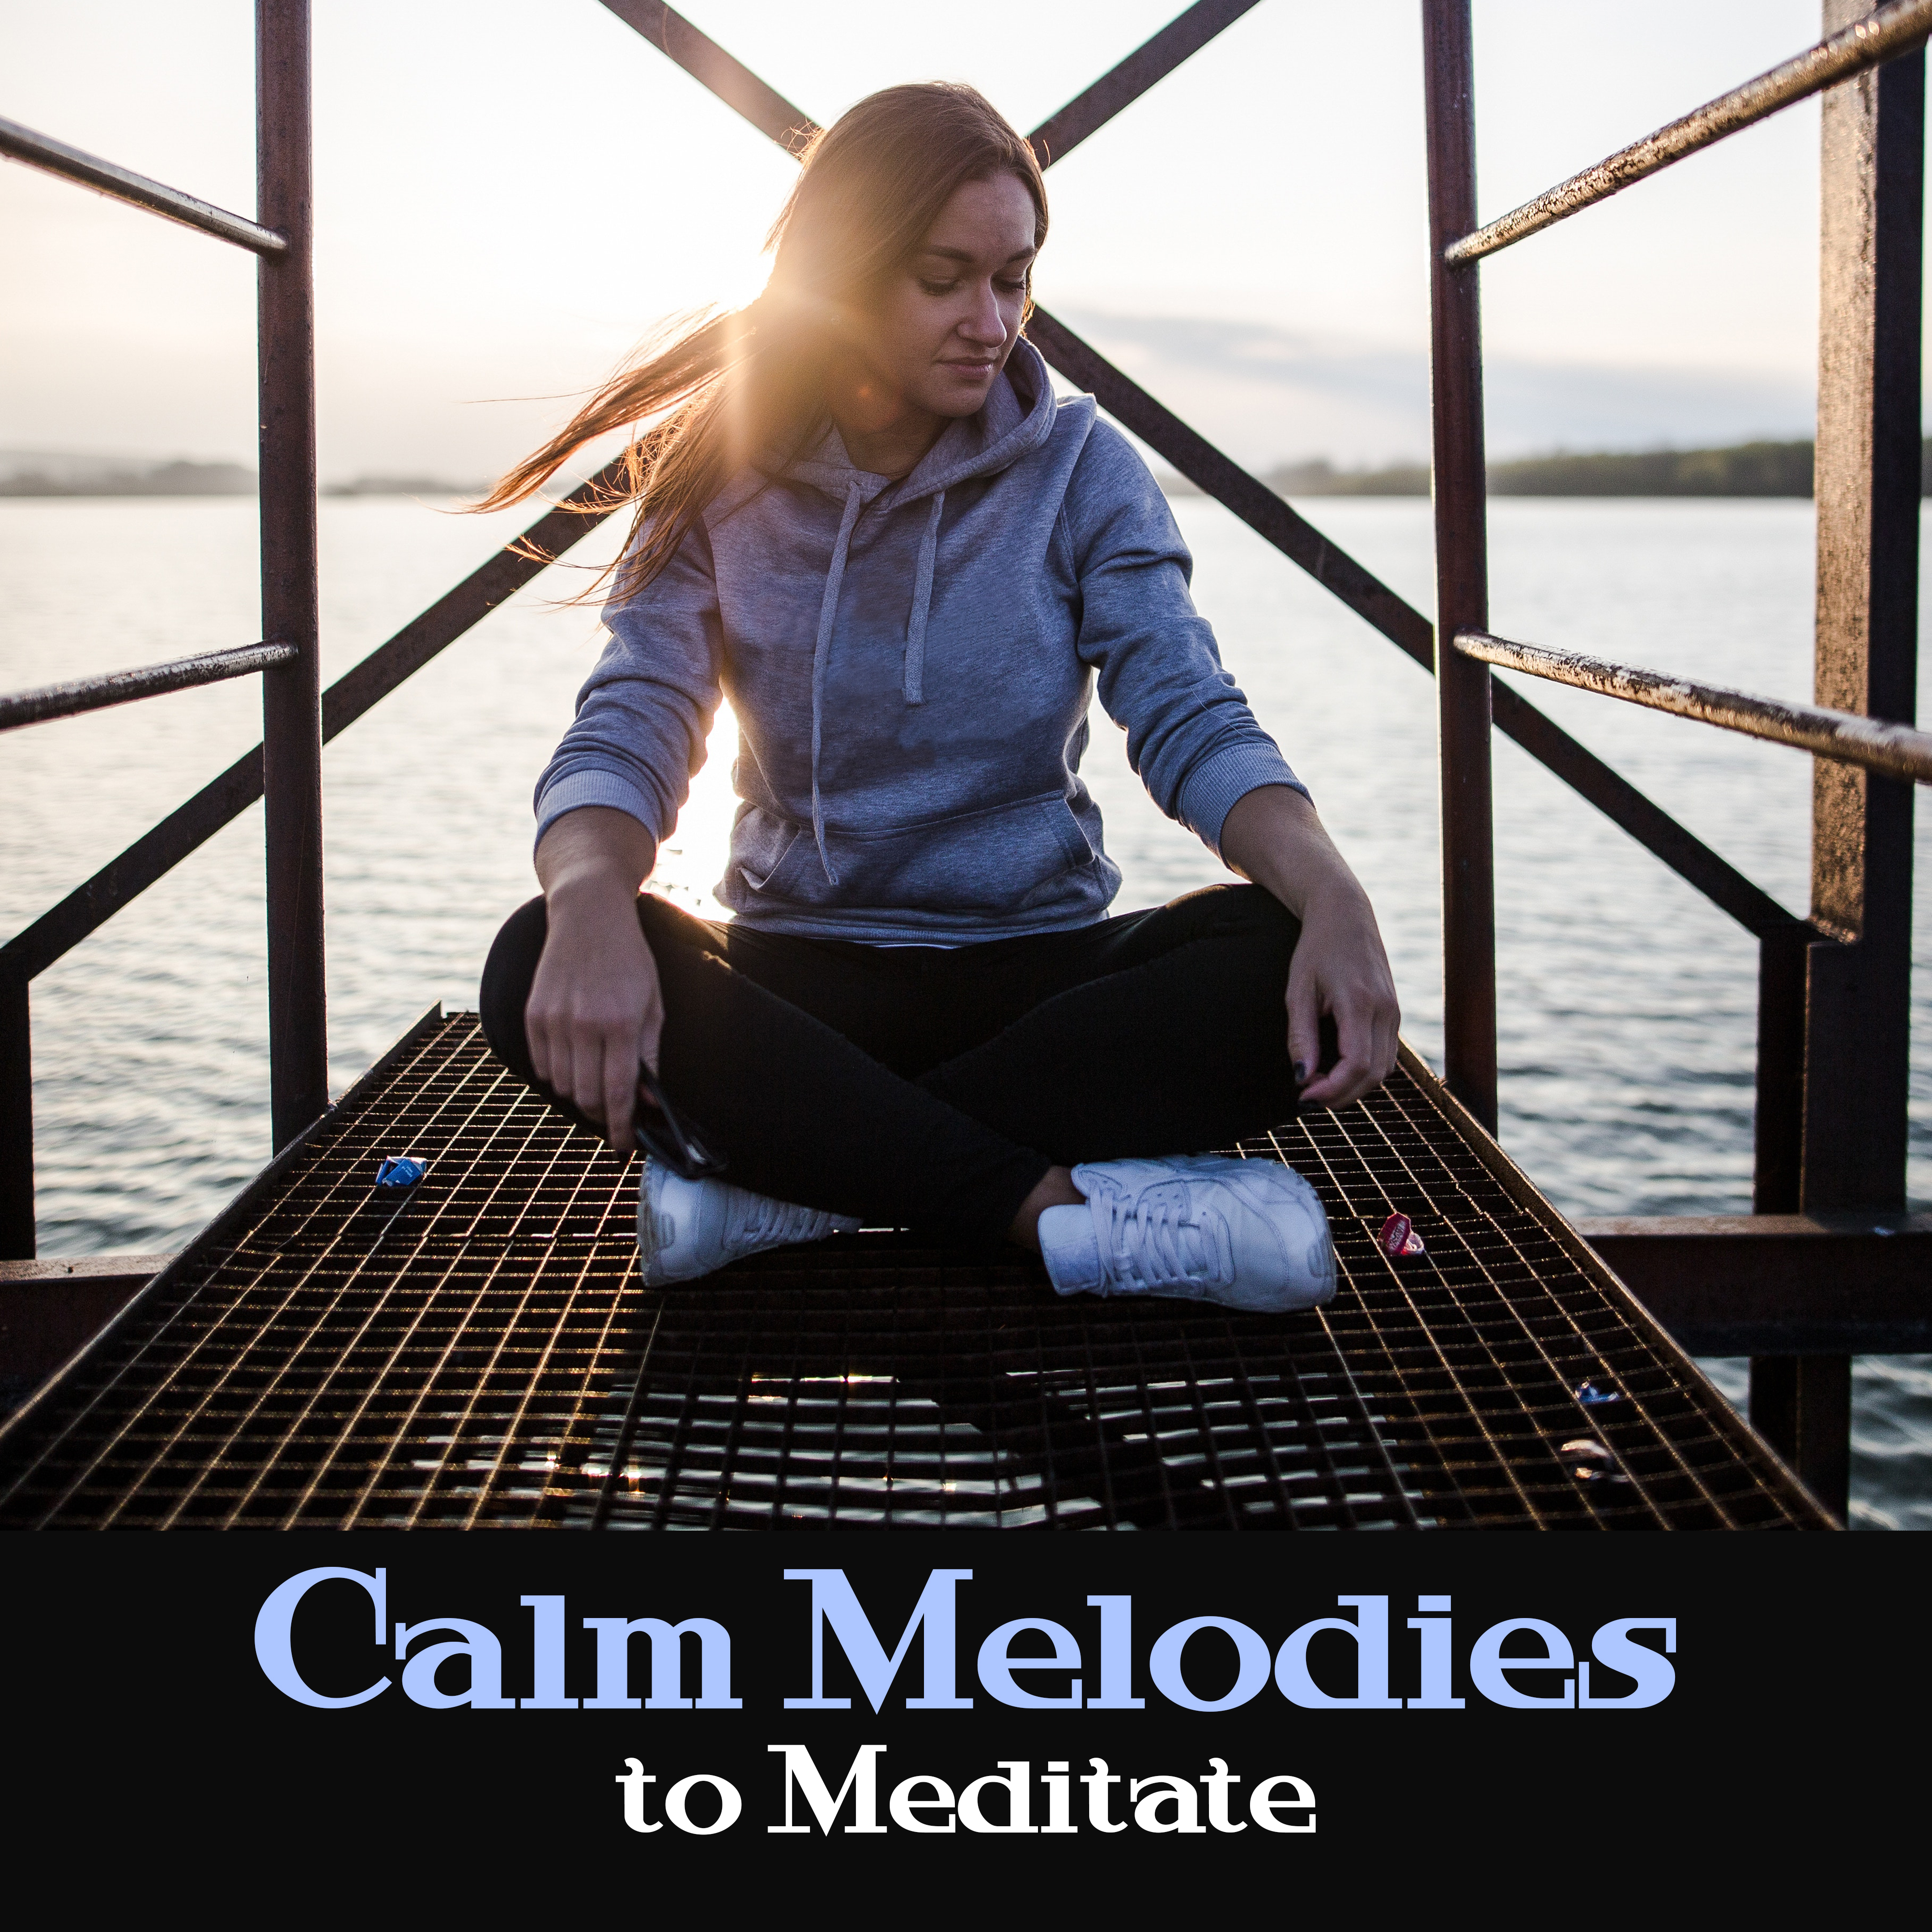 Calm Melodies to Meditate  Soft Music to Relax, Healing Therapy, Rest a Bit, Meditation Lounge, Buddha Music